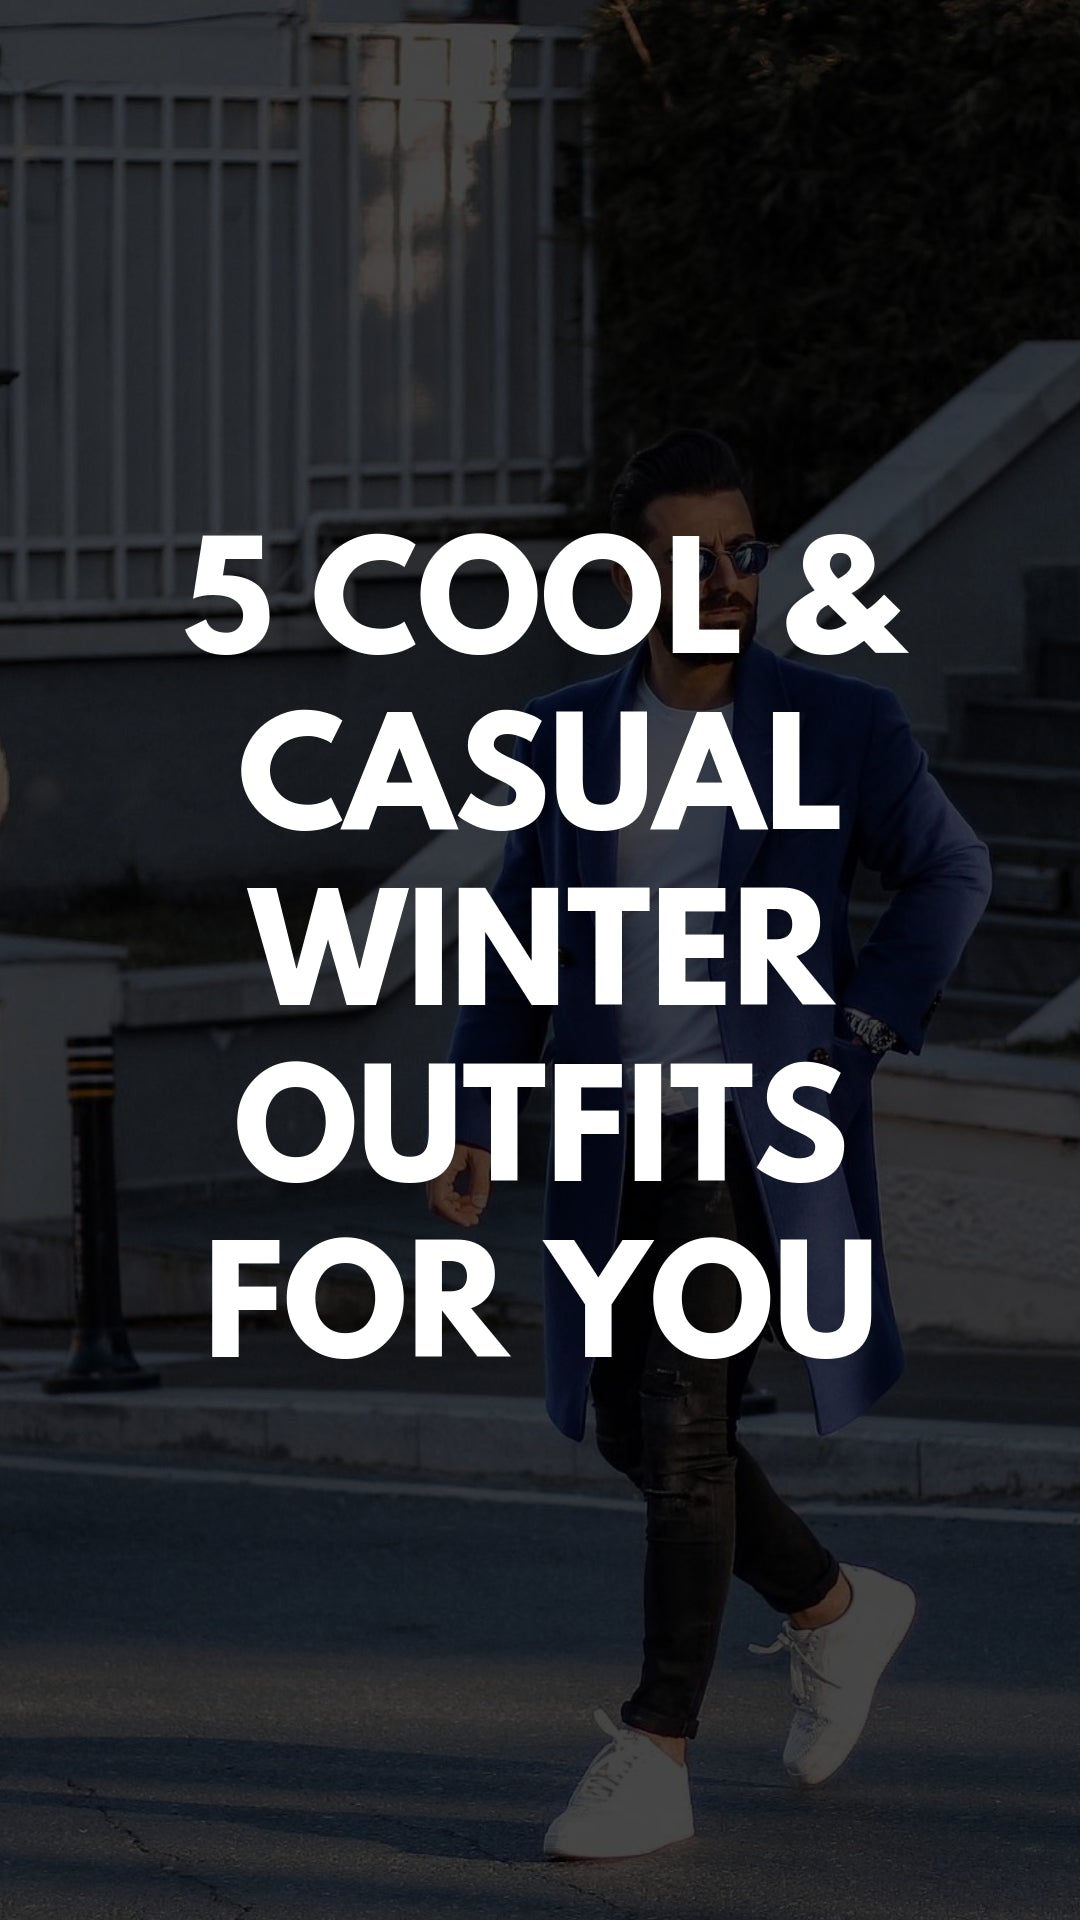 5 Cool Outfits I'm Stealing From This Style Icon #streetstyle #winterfashion #streetstyle 